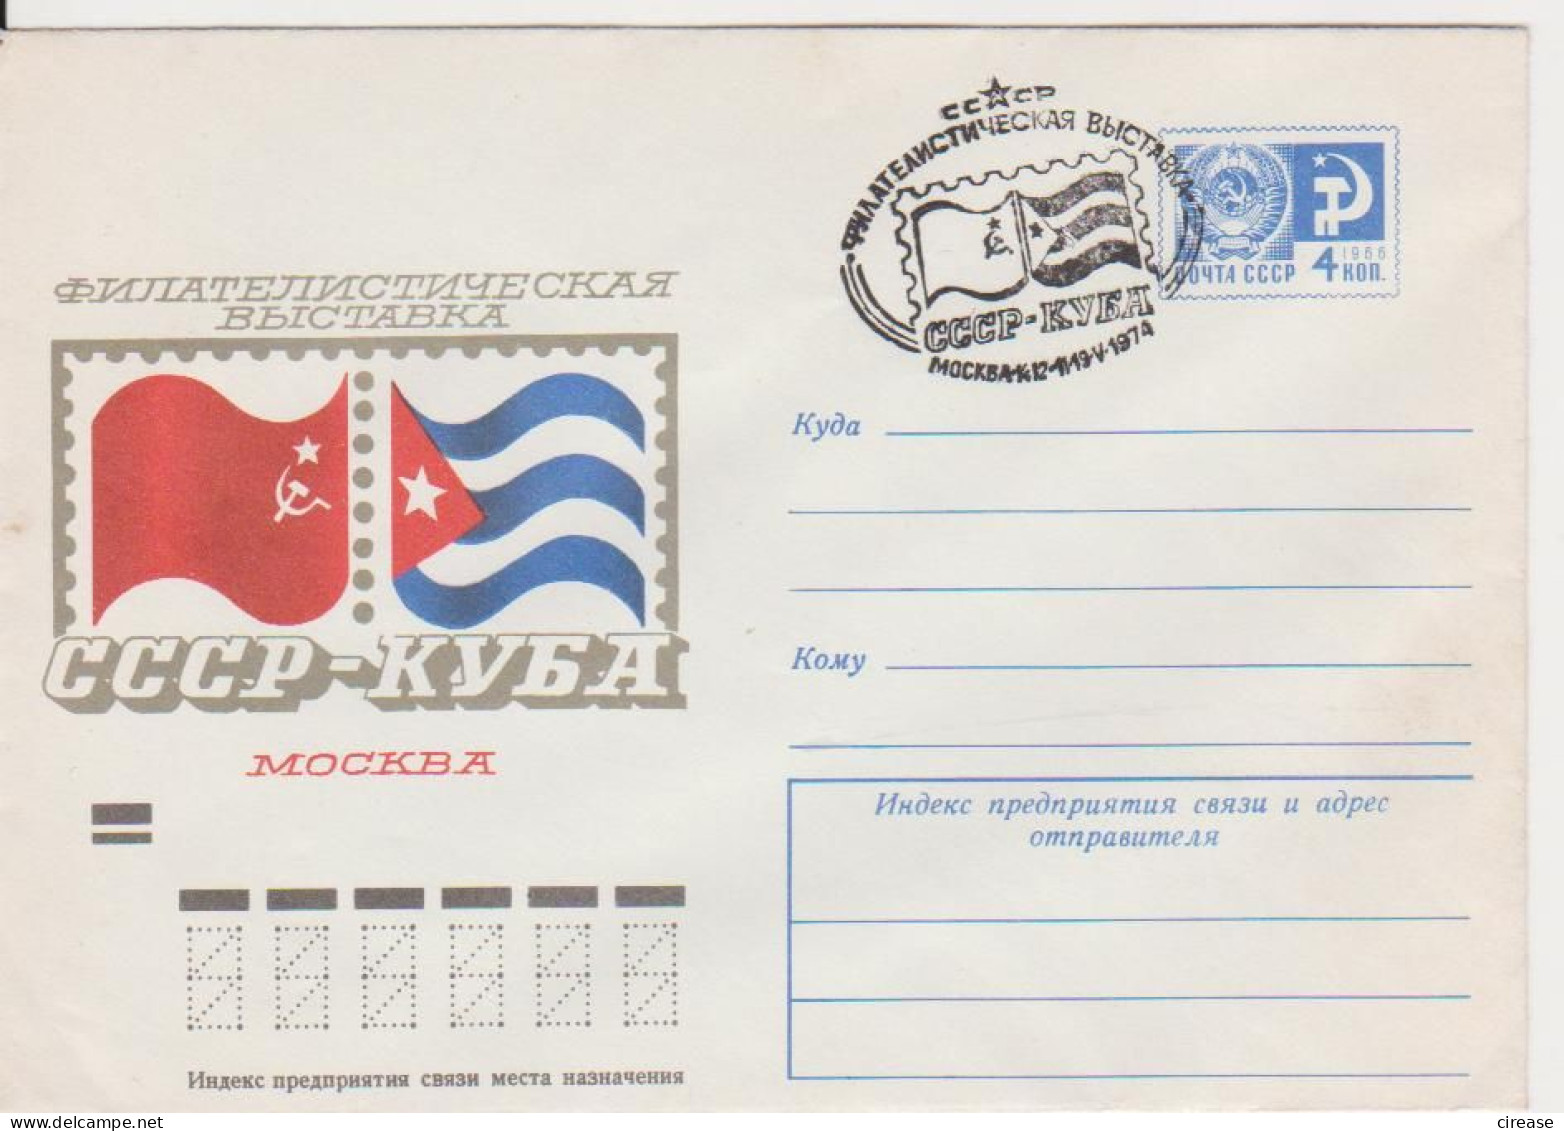 FLAGS. RUSSIAN CUBA FRIENDSHIP RUSSIA CCCP URSS POSTAL STATIONERY - Enveloppes